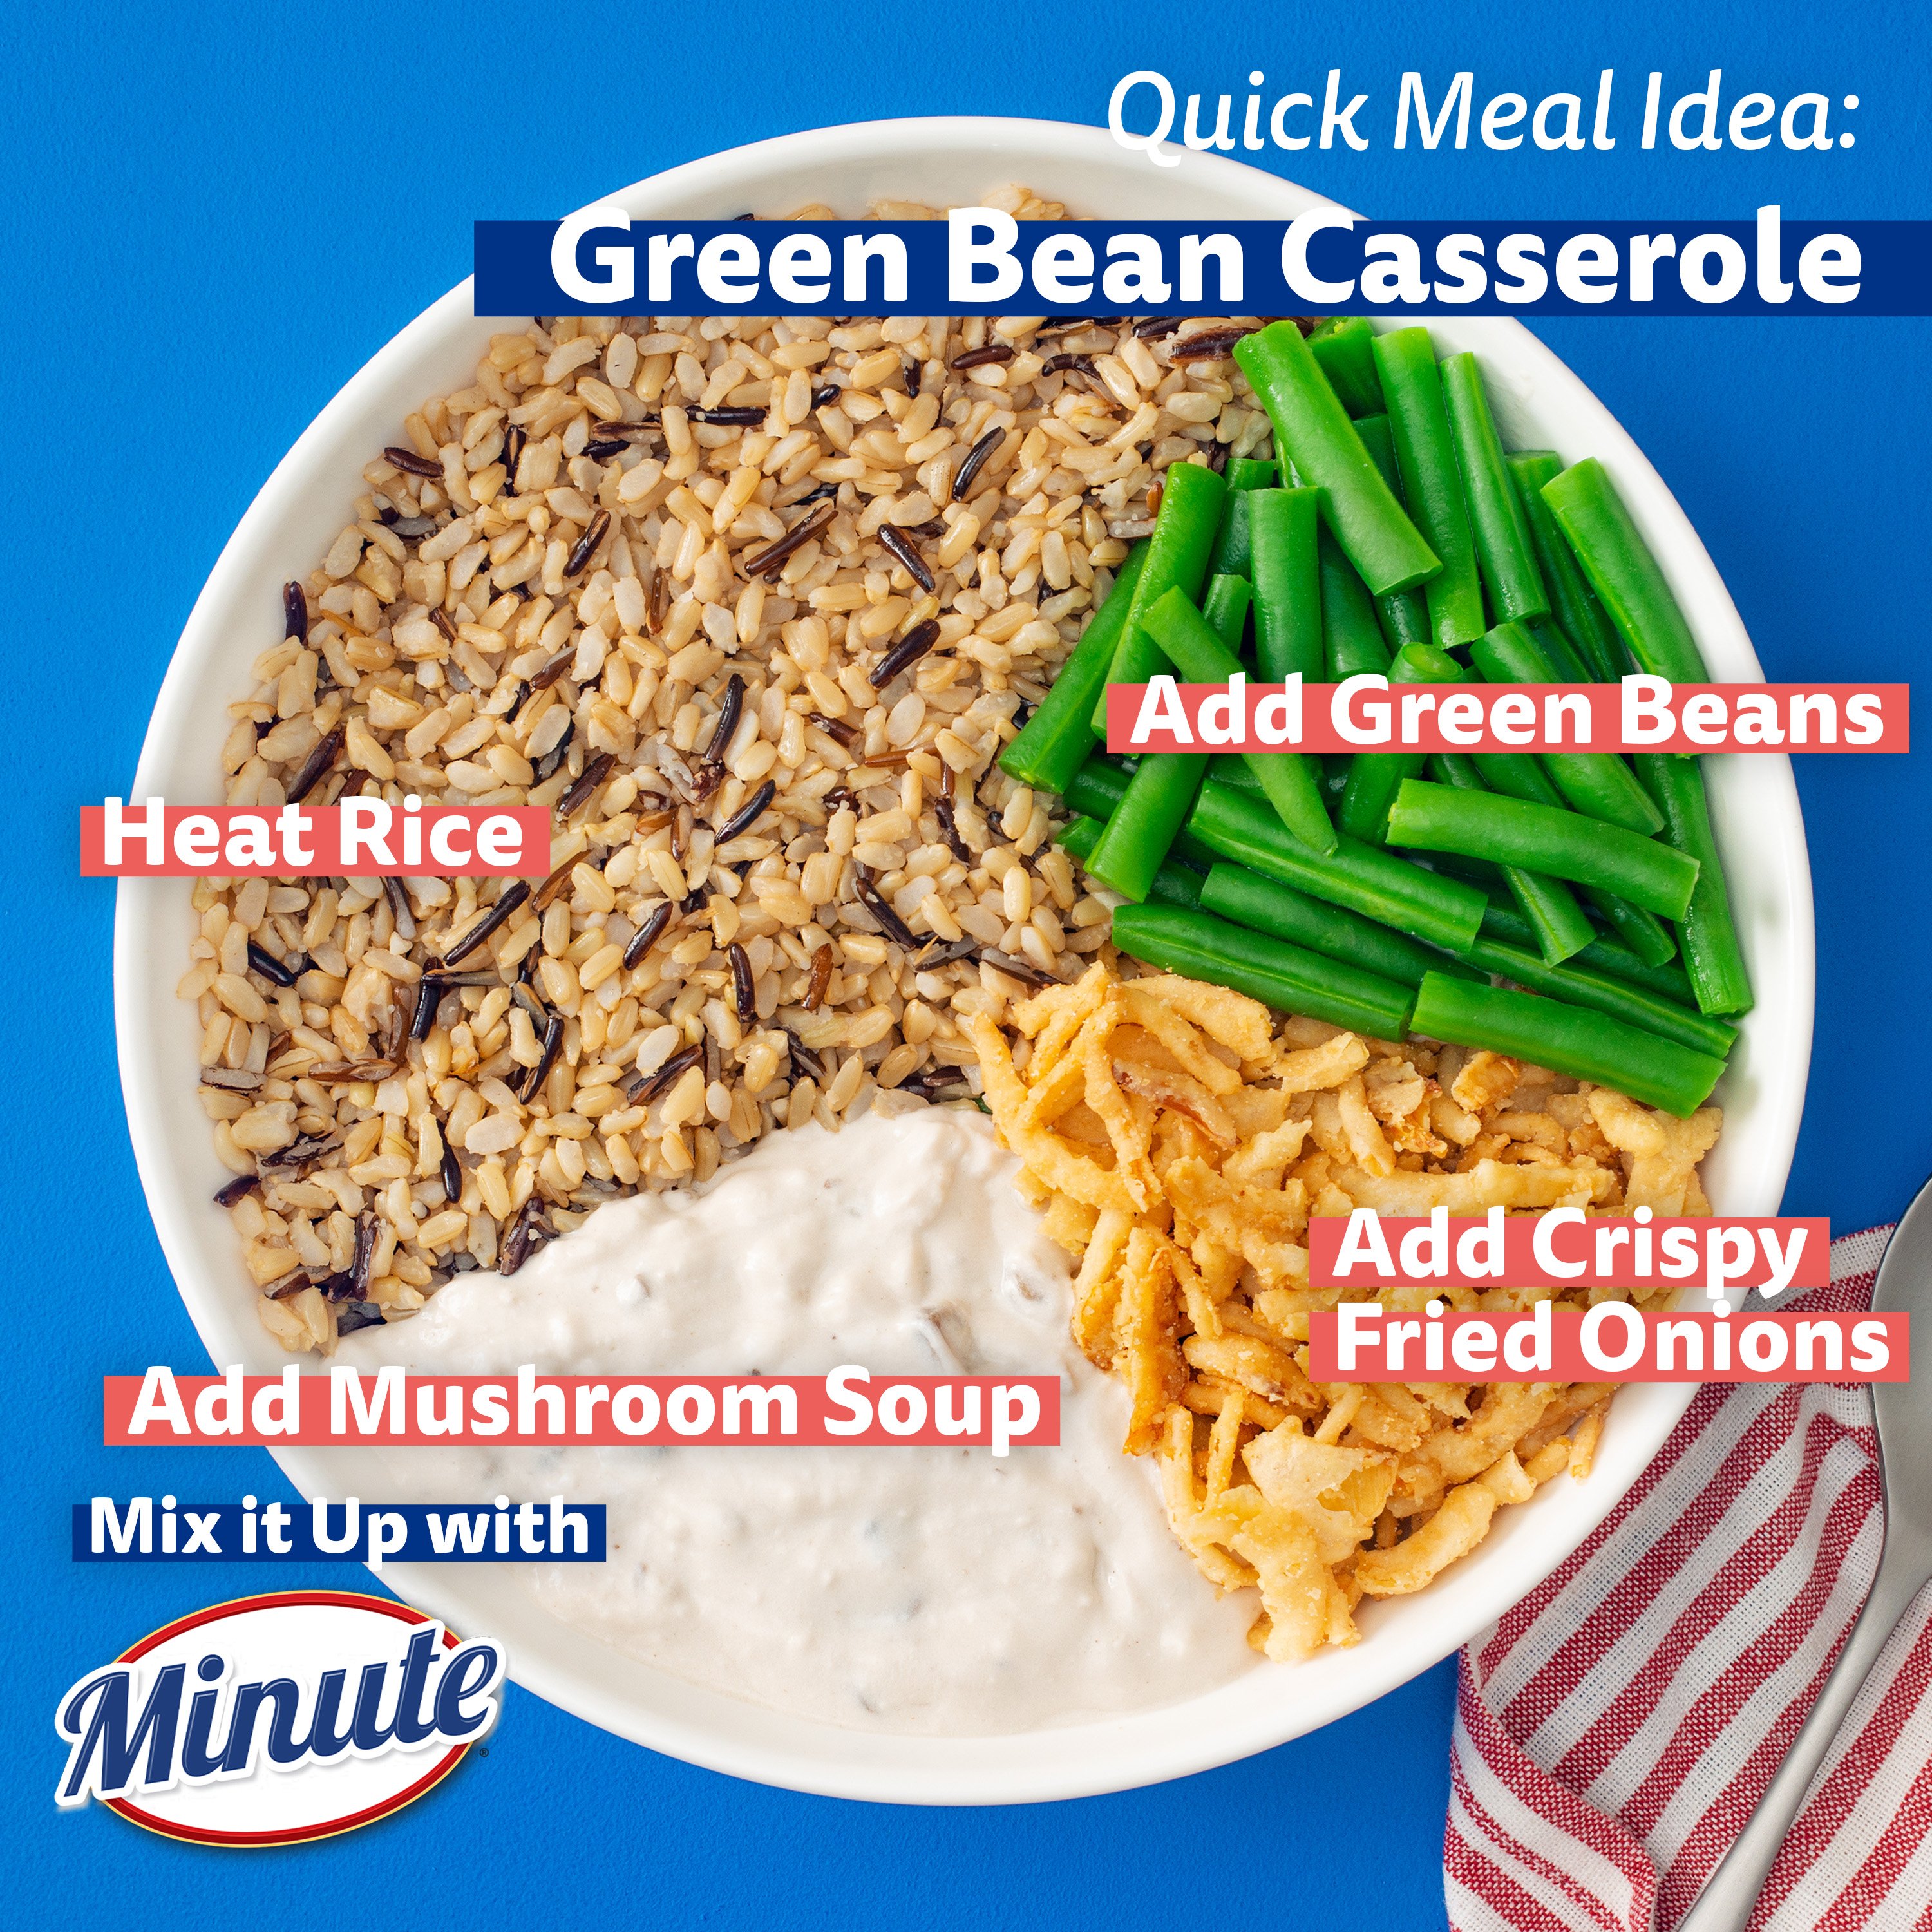 Minute Ready to Serve Brown & Wild Rice - Shop Rice & Grains at H-E-B